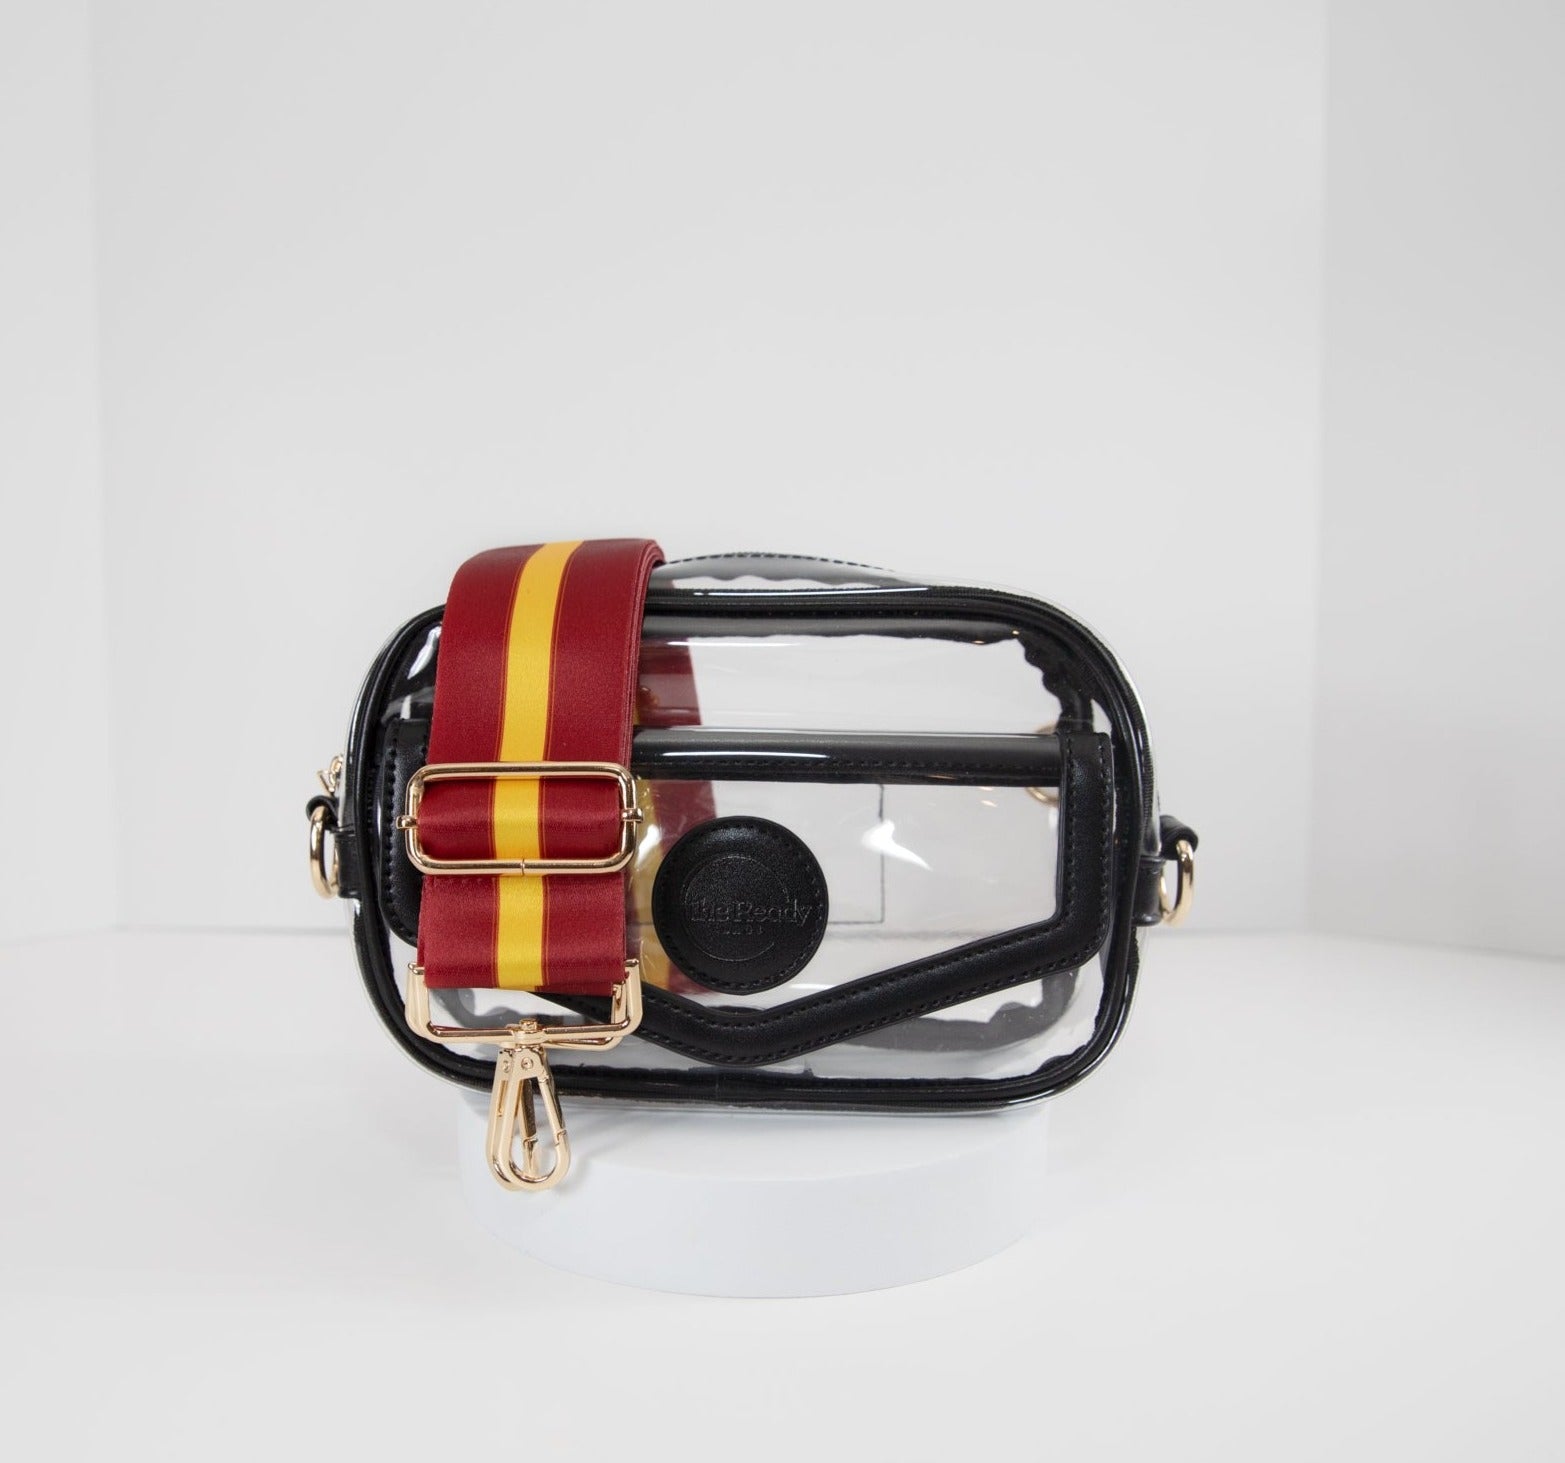 Clear stadium bag in black leather trim, front facing, with a crossbody strap in USC Trojan team colors.